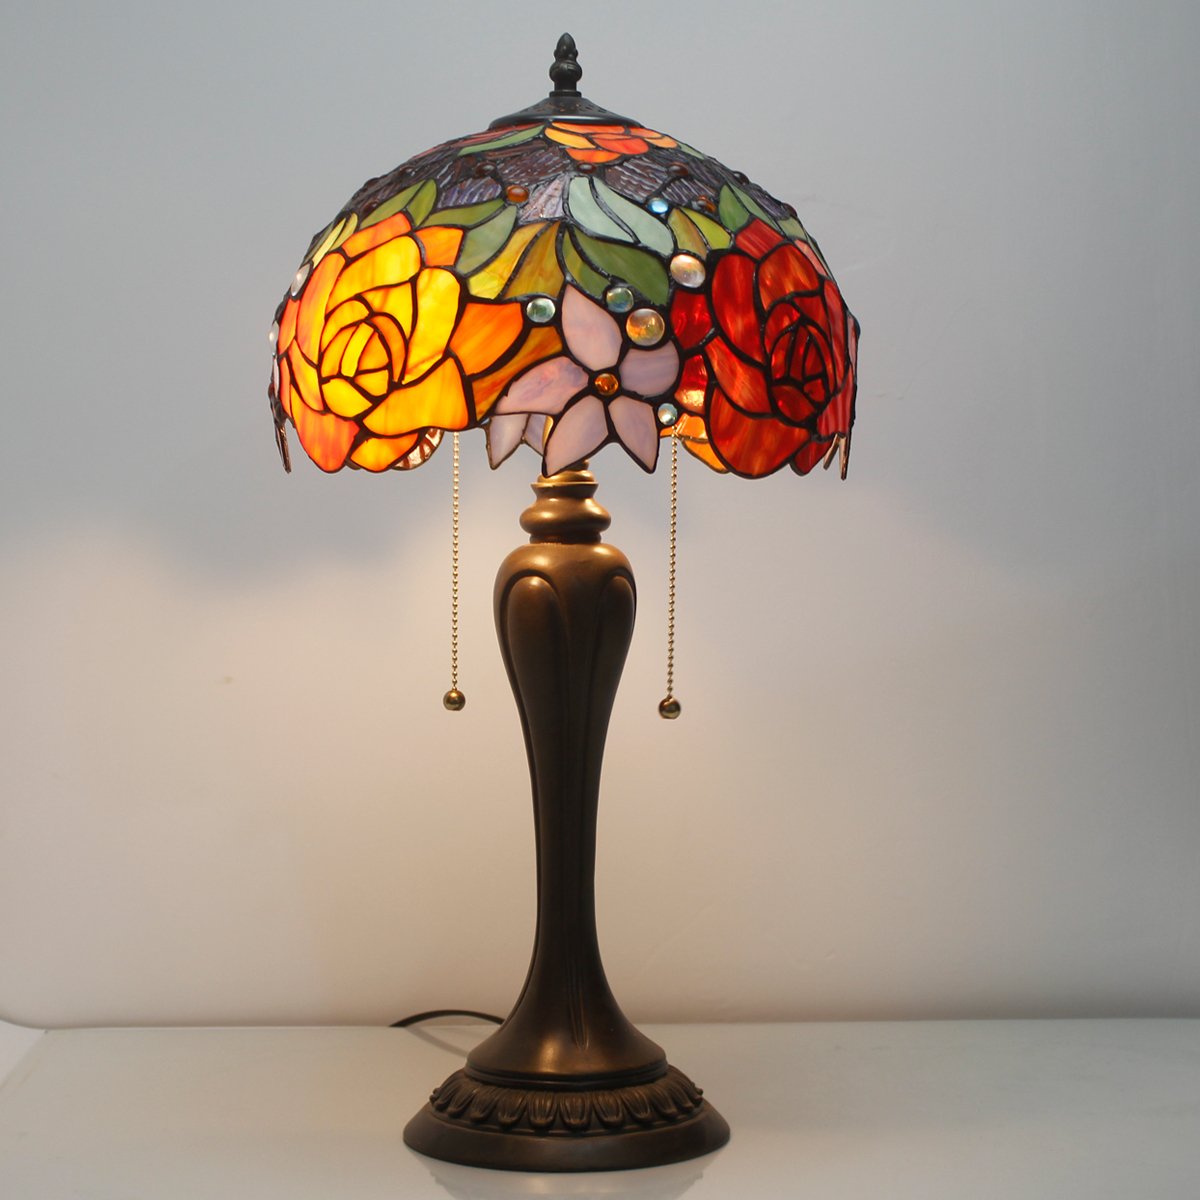 WERFACTORY Tiffany Lamp Stained Glass Table Lamp Red Rose Flower Bedside Desk Reading Light 12X12X22 Inches Decor Bedroom Living Room Home Office S001 Series